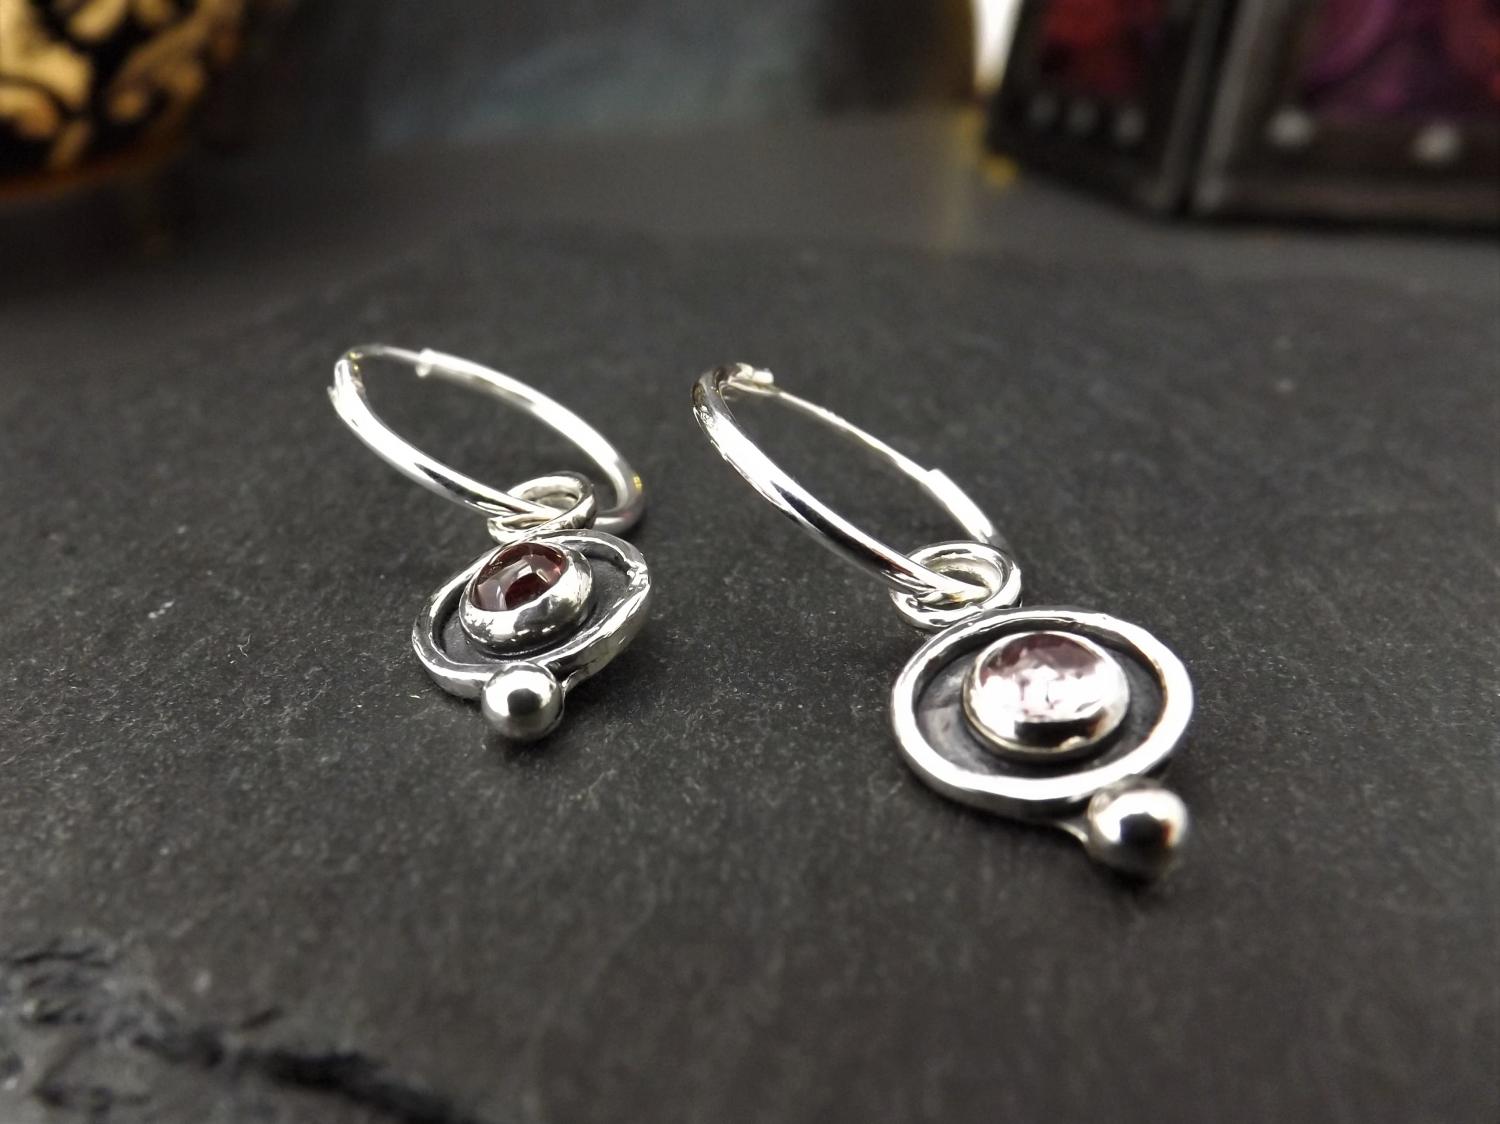 Pink Tourmaline in Silver Circle Earrings with Silver Balls on Sleeper Hoops